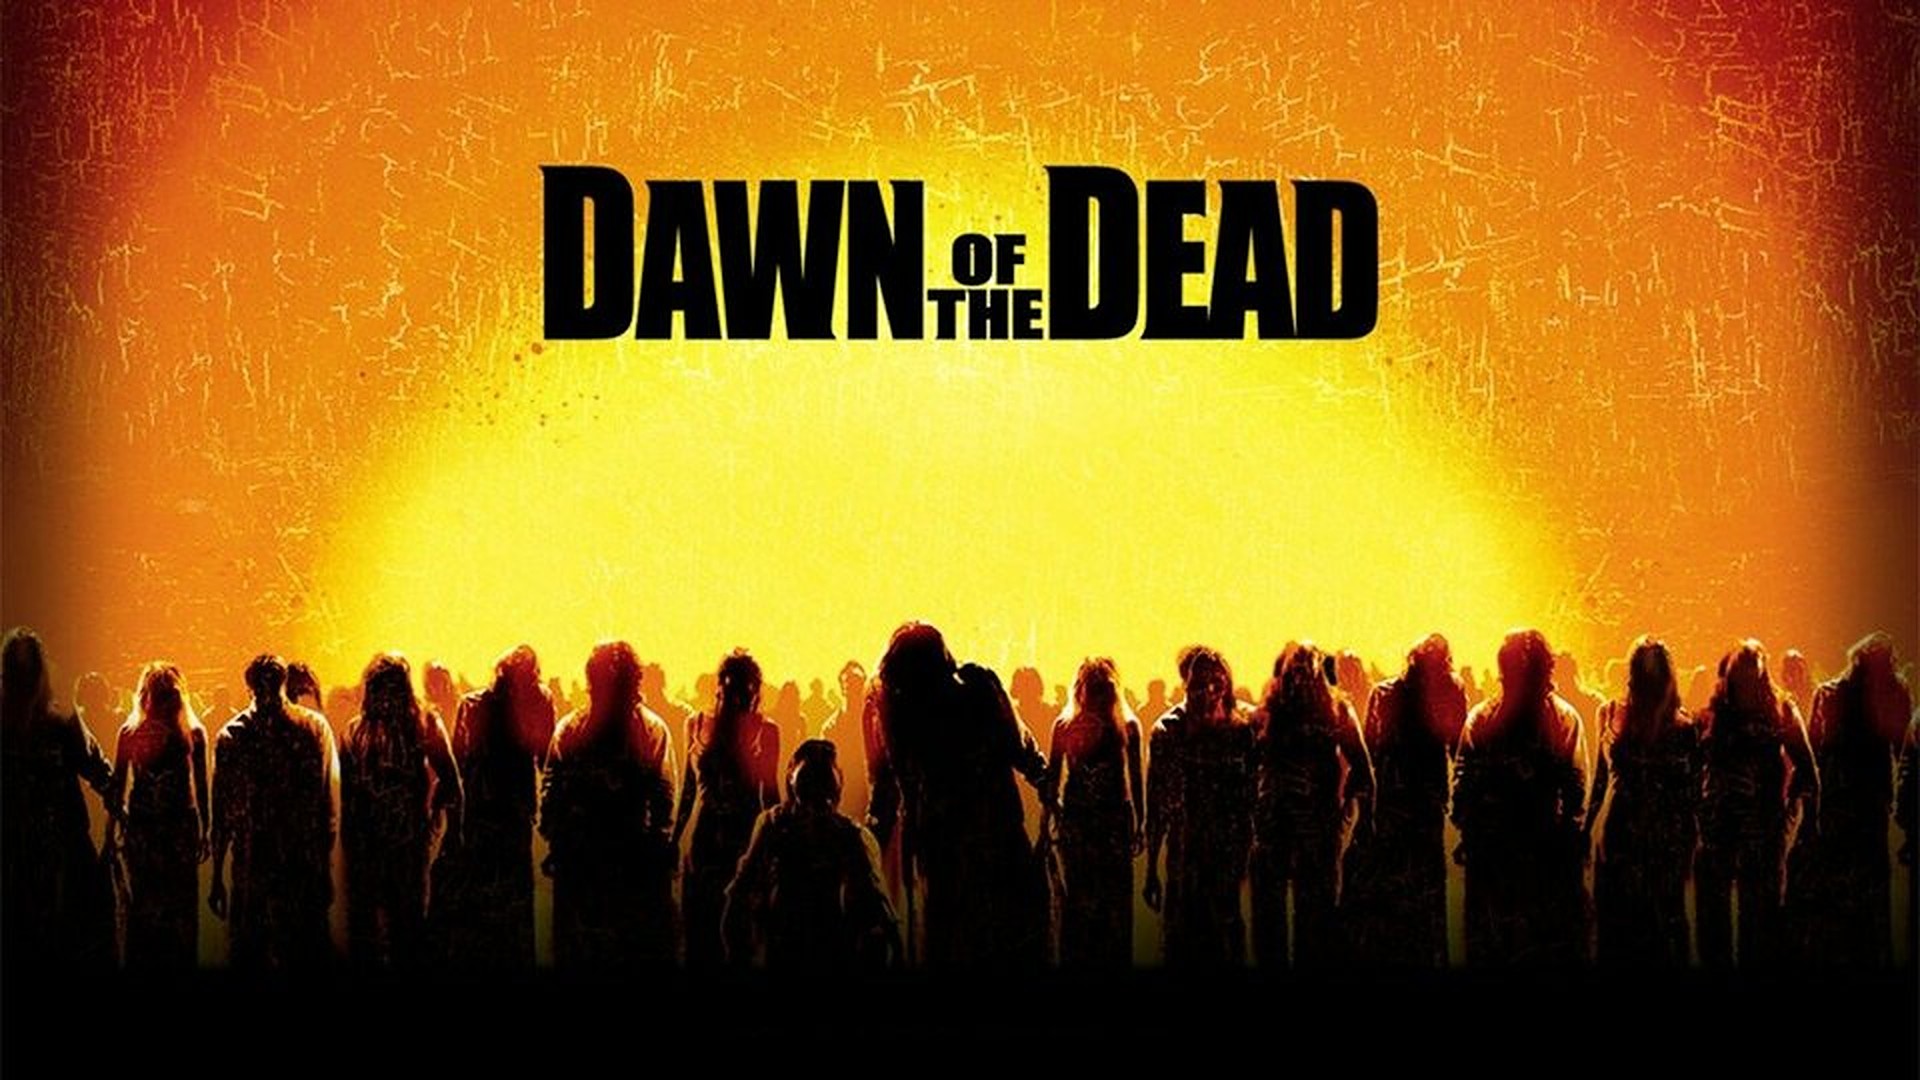 https://facts.net/wp-content/uploads/2023/06/40-facts-about-the-movie-dawn-of-the-dead-1687785449.jpg